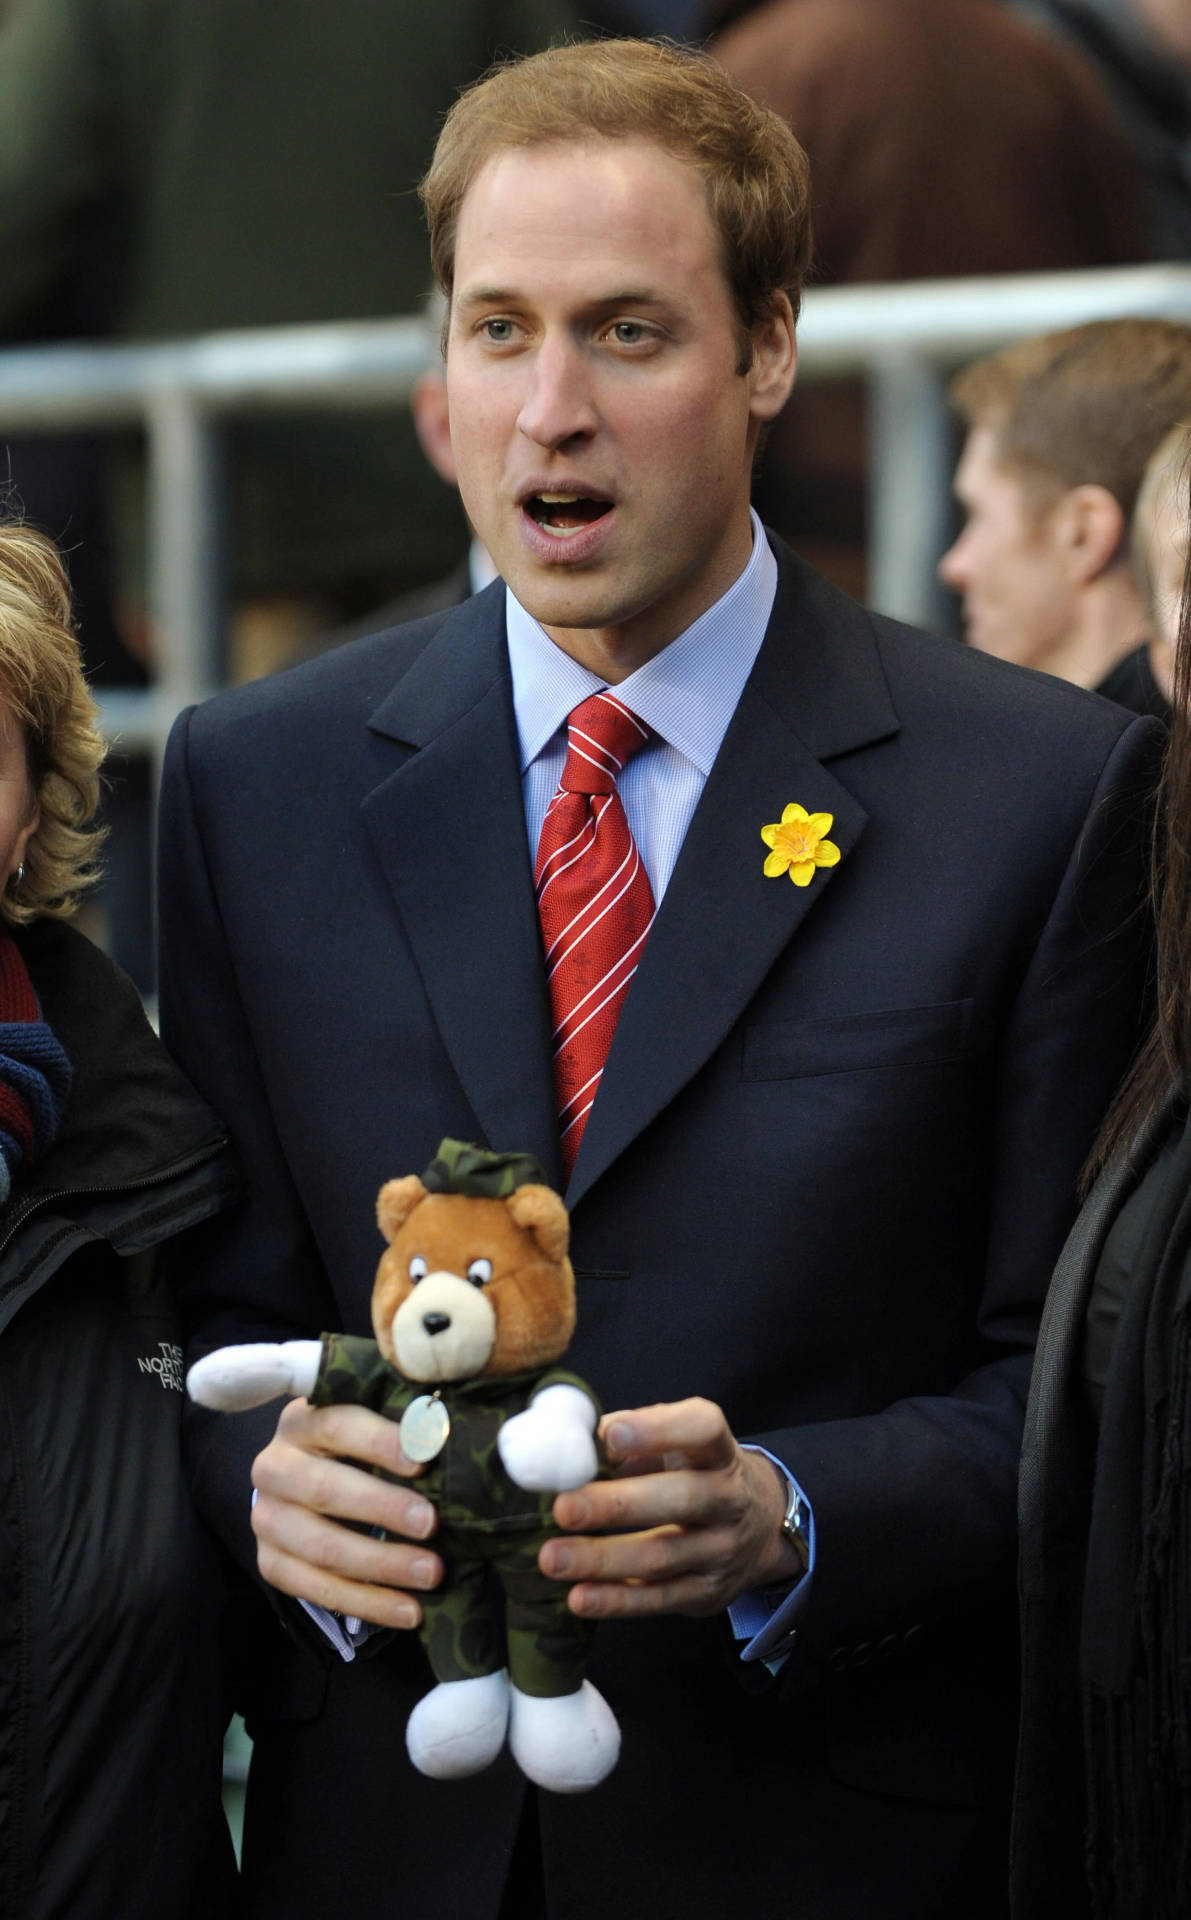 Prince William smiling while holding a stuffed toy Wallpaper